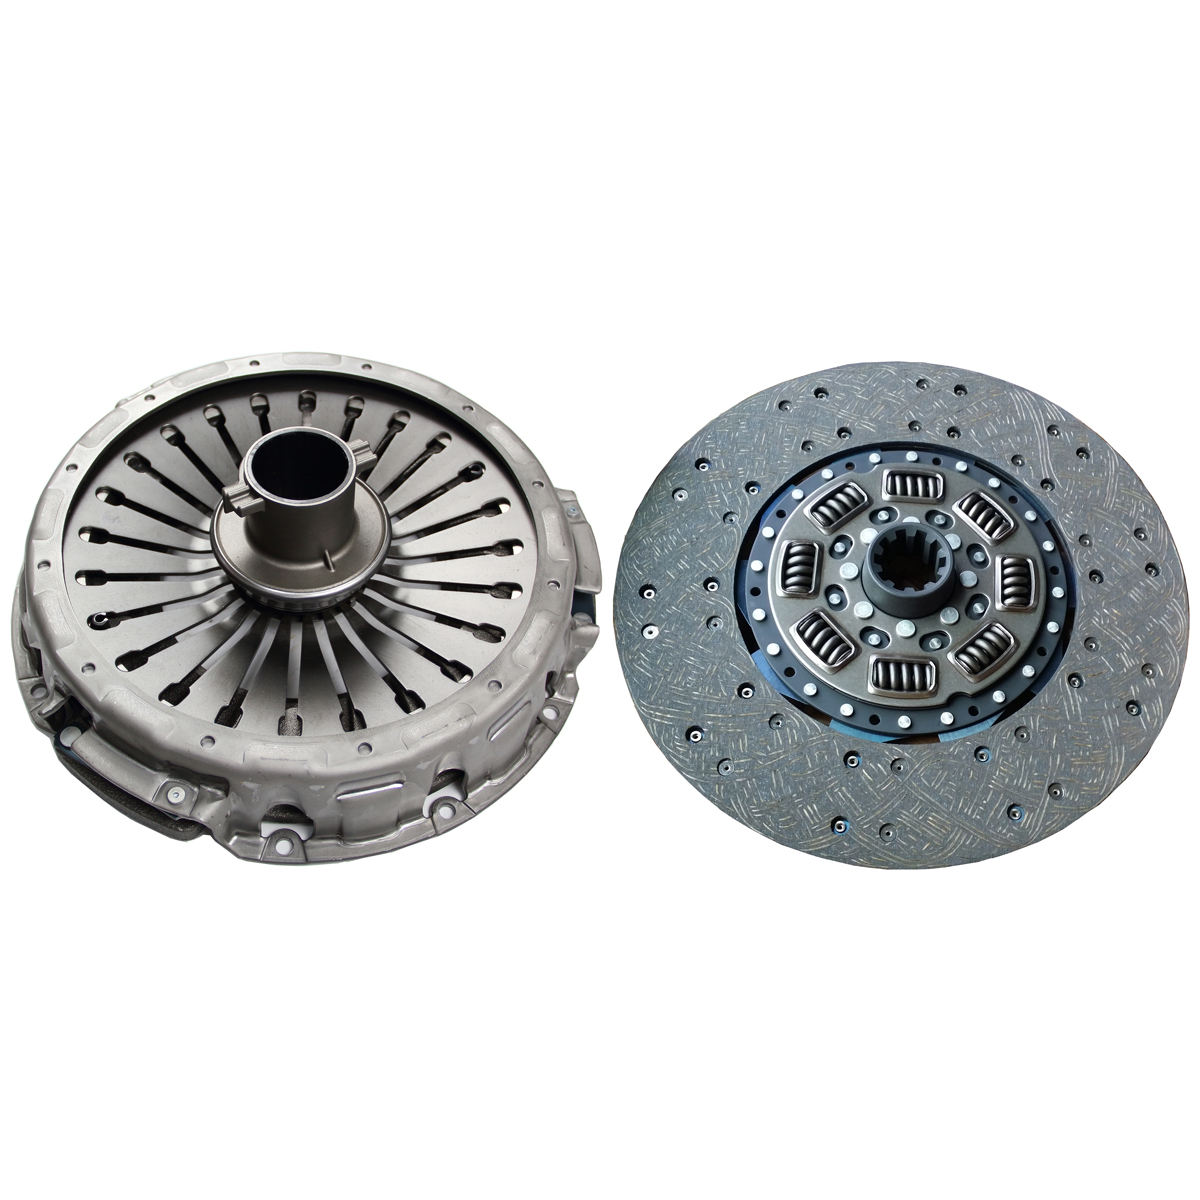 104108-3 365MM Terbon Truck Parts Clutch Assembly  Clutch Kit For American Medium Duty Truck